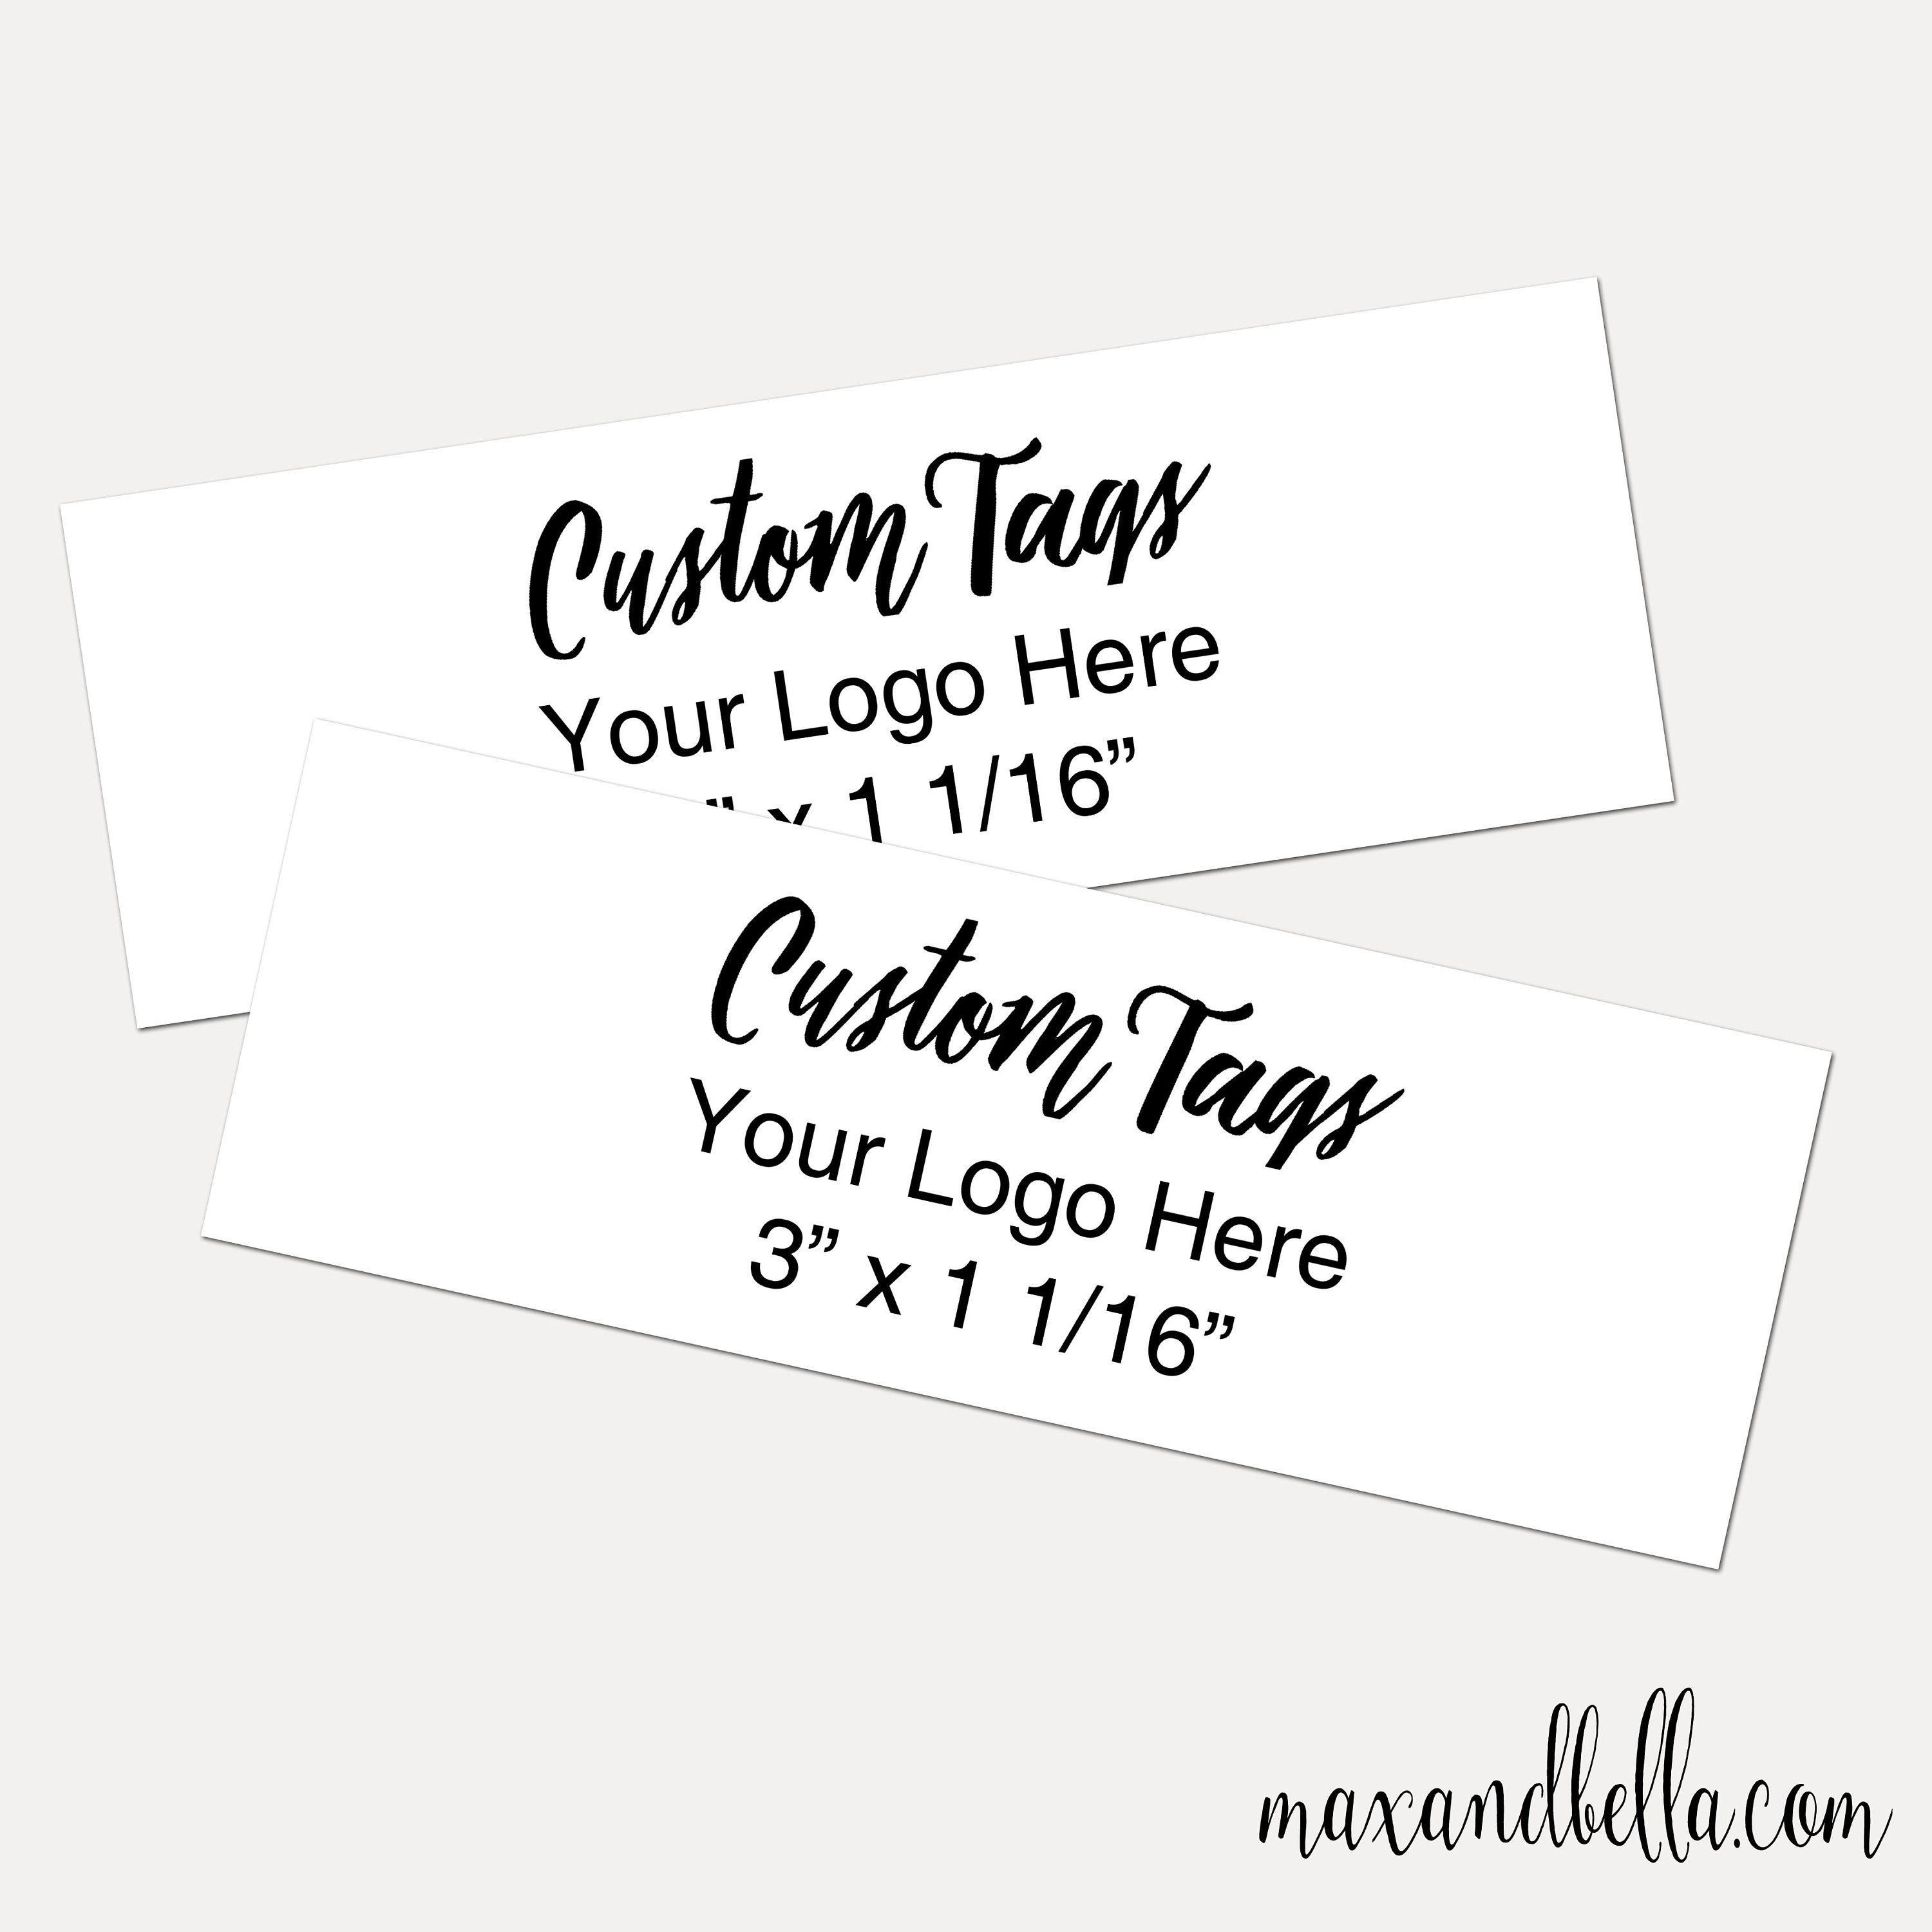 Merchandise Tags with Logo - 100 Custom Kraft tags, Personalized Tags, Price Tags, Product Tags ...